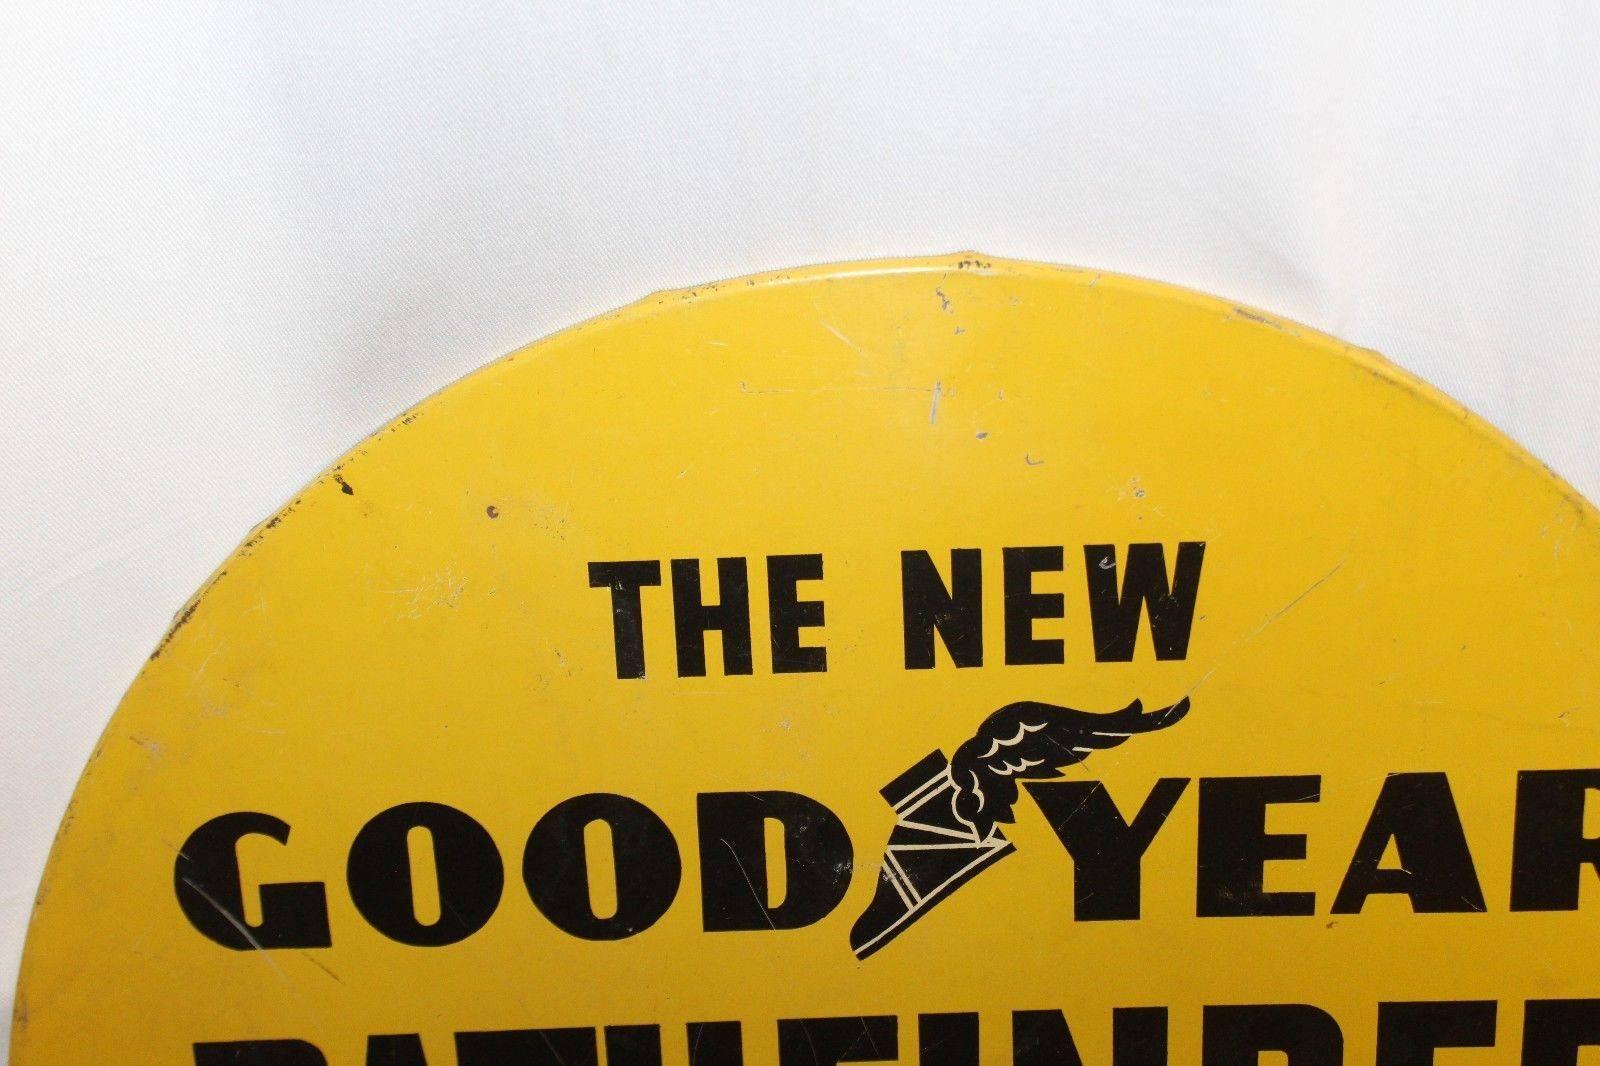 Advertising its high quality and low price is this wonderful Goodyear Tires sign. Normally these signs were found in the middle of a Pathfinder Tire that would be on display. In great condition considering its age and being a harder to find sign.